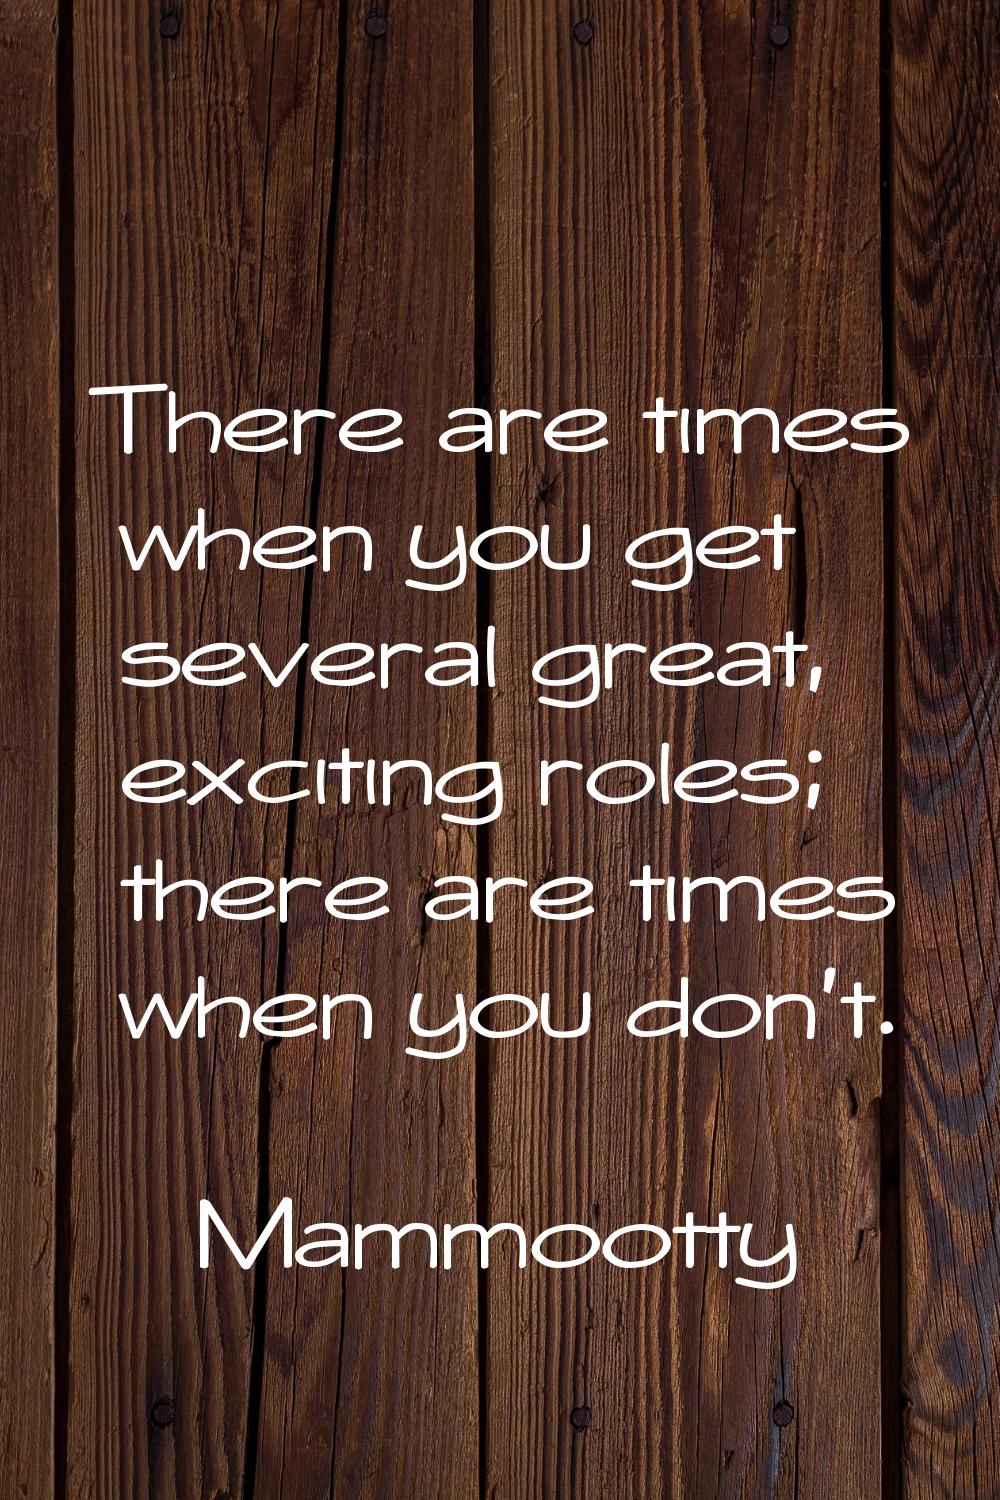 There are times when you get several great, exciting roles; there are times when you don't.